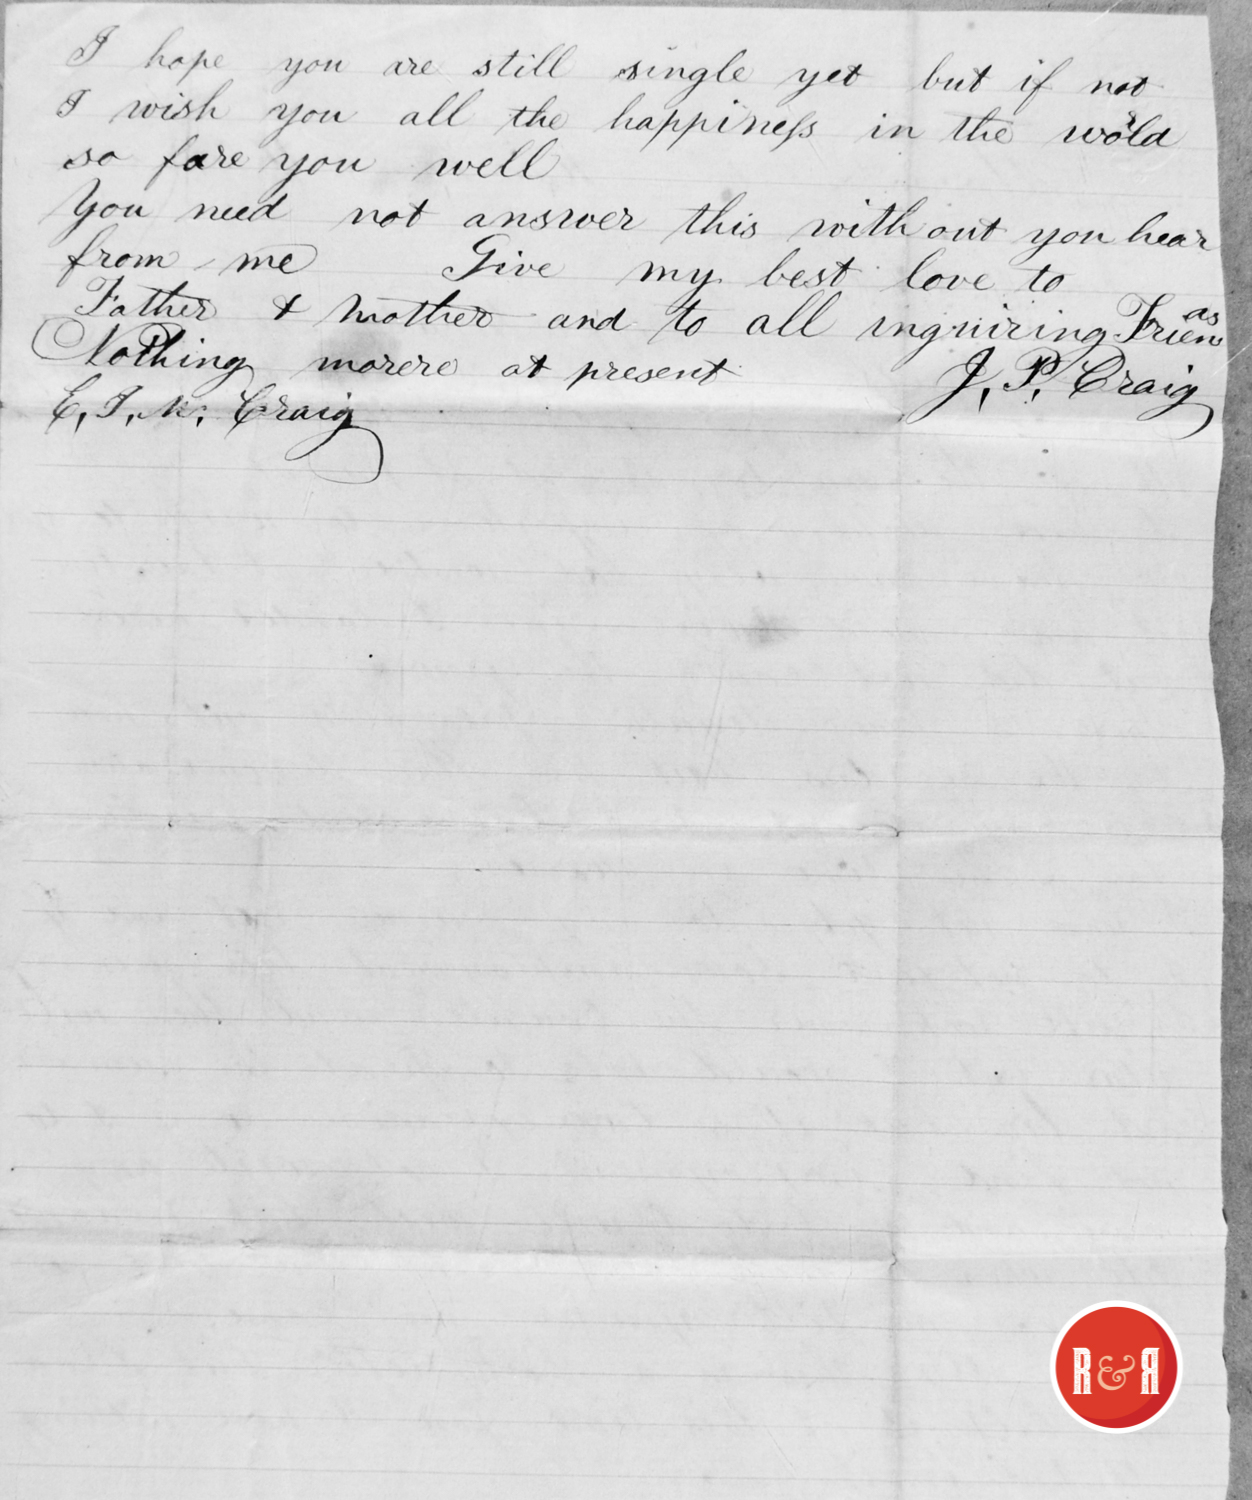 LETTER TO MS. CRAIG FROM WARREN, ARK., - 1858, p. 2